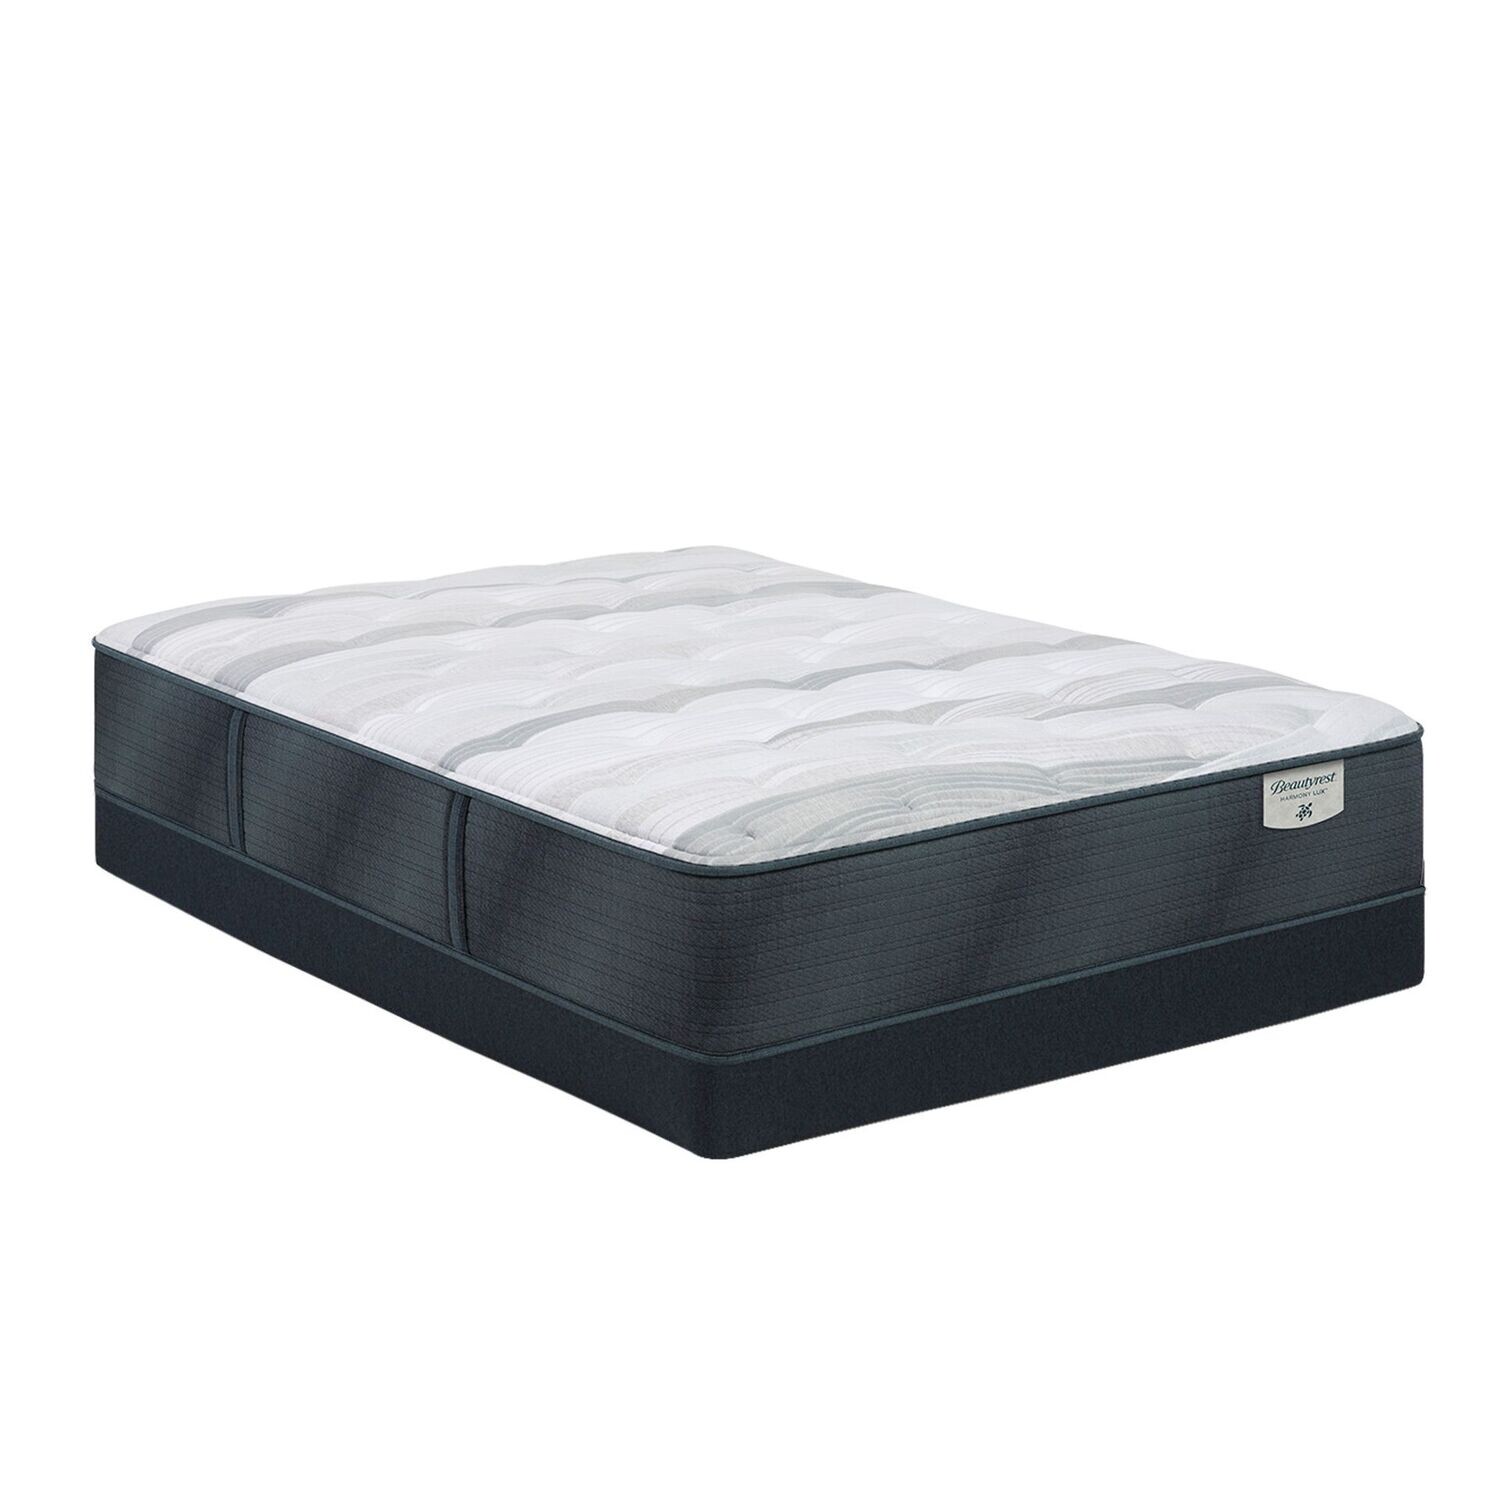 BeautyRest Harmony Lux Plush, Size: Queen, Add a Base: No Base